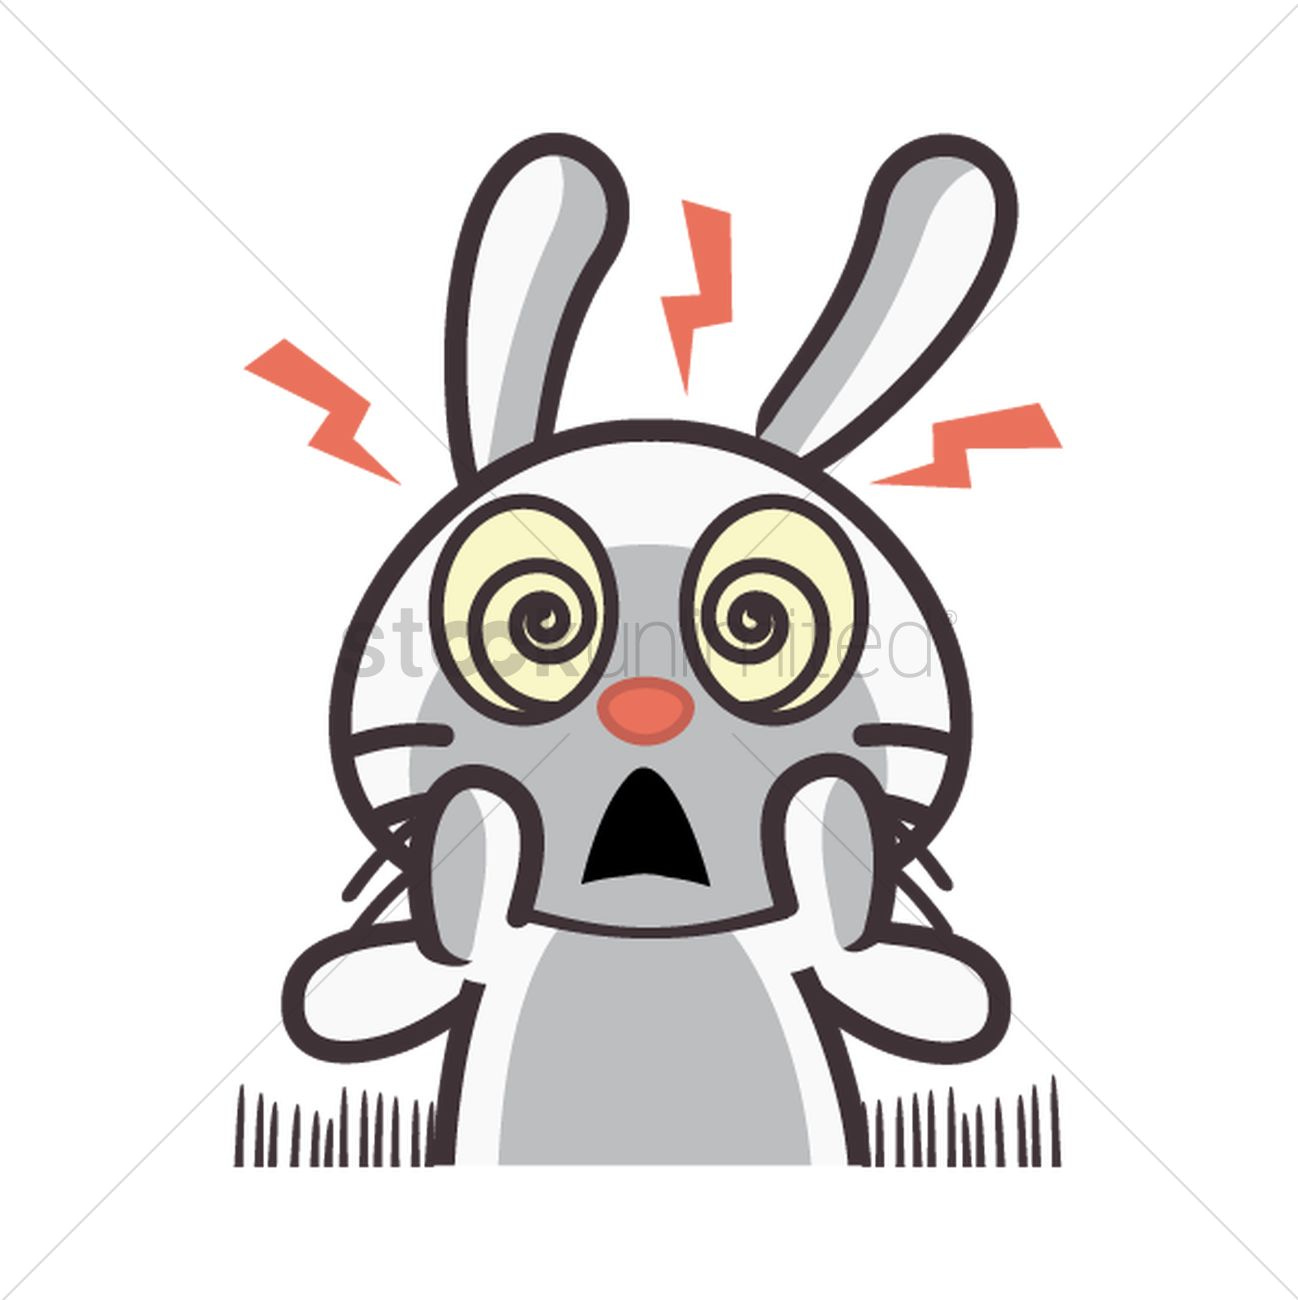 Cute rabbit gasping Vector Image - 1956991 | StockUnlimited